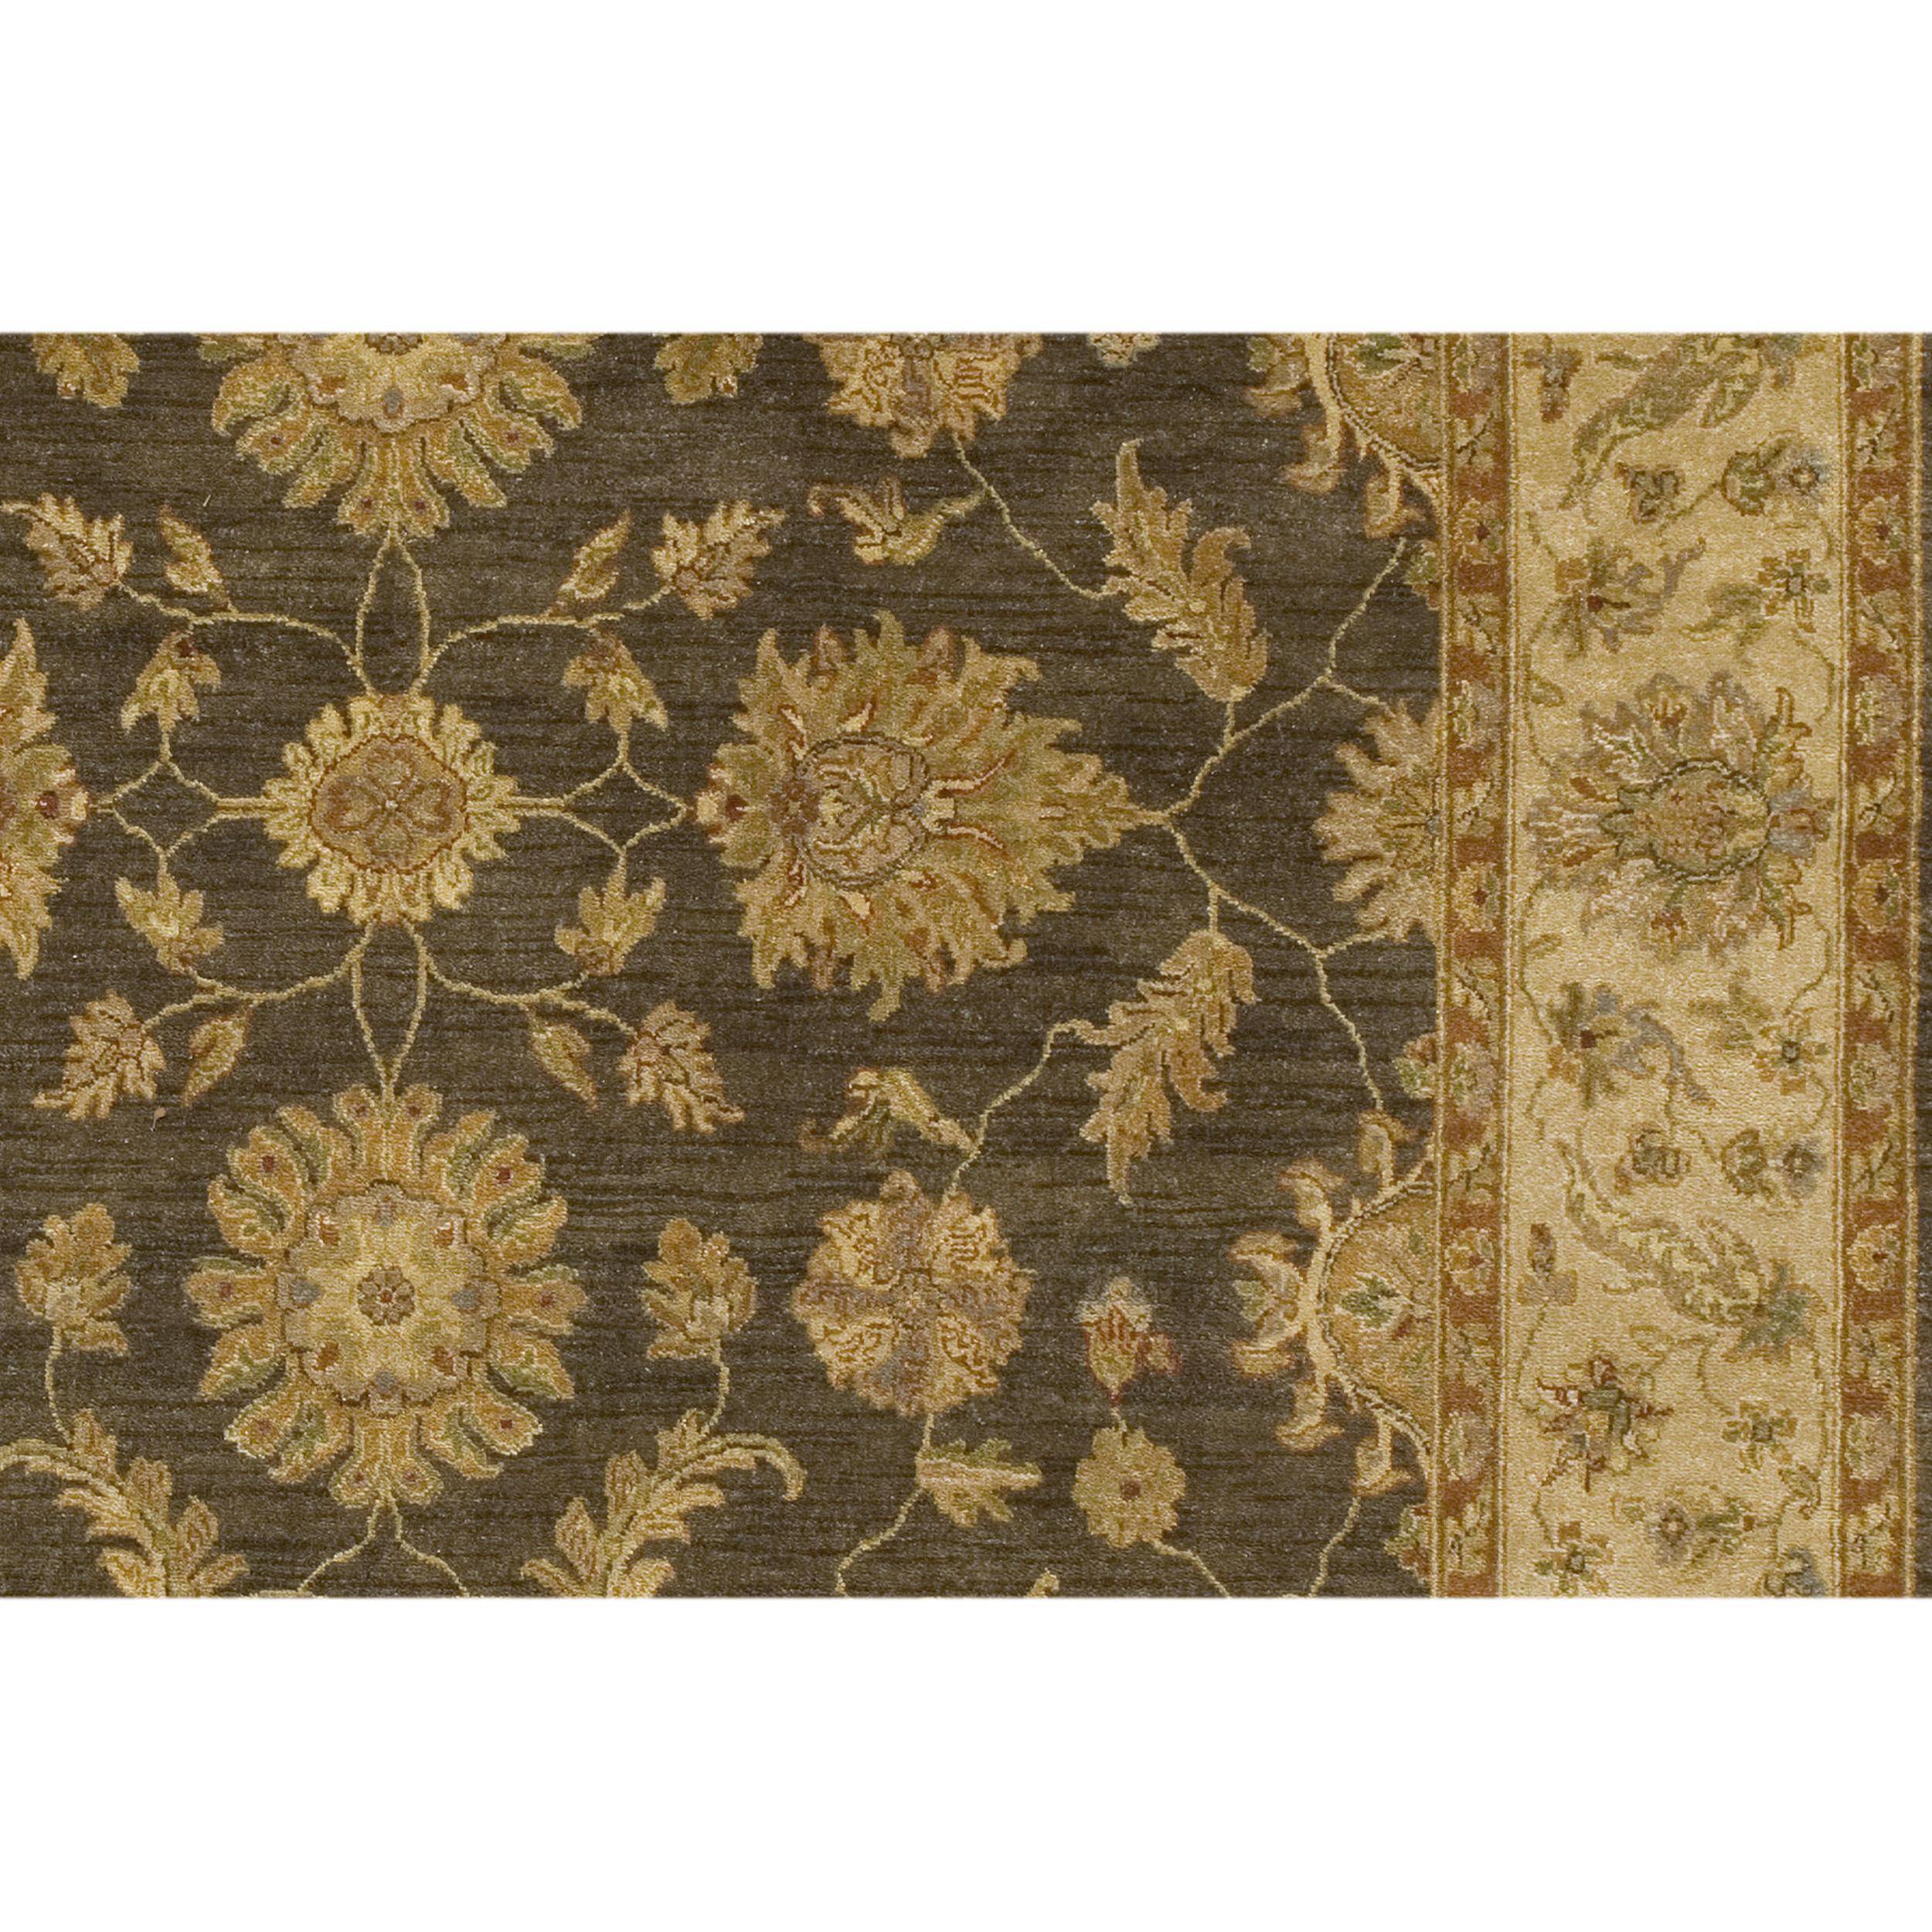 Indian Luxury Traditional Hand-Knotted Amritsar Ziegler Brown/Beige 14x28 Rug For Sale